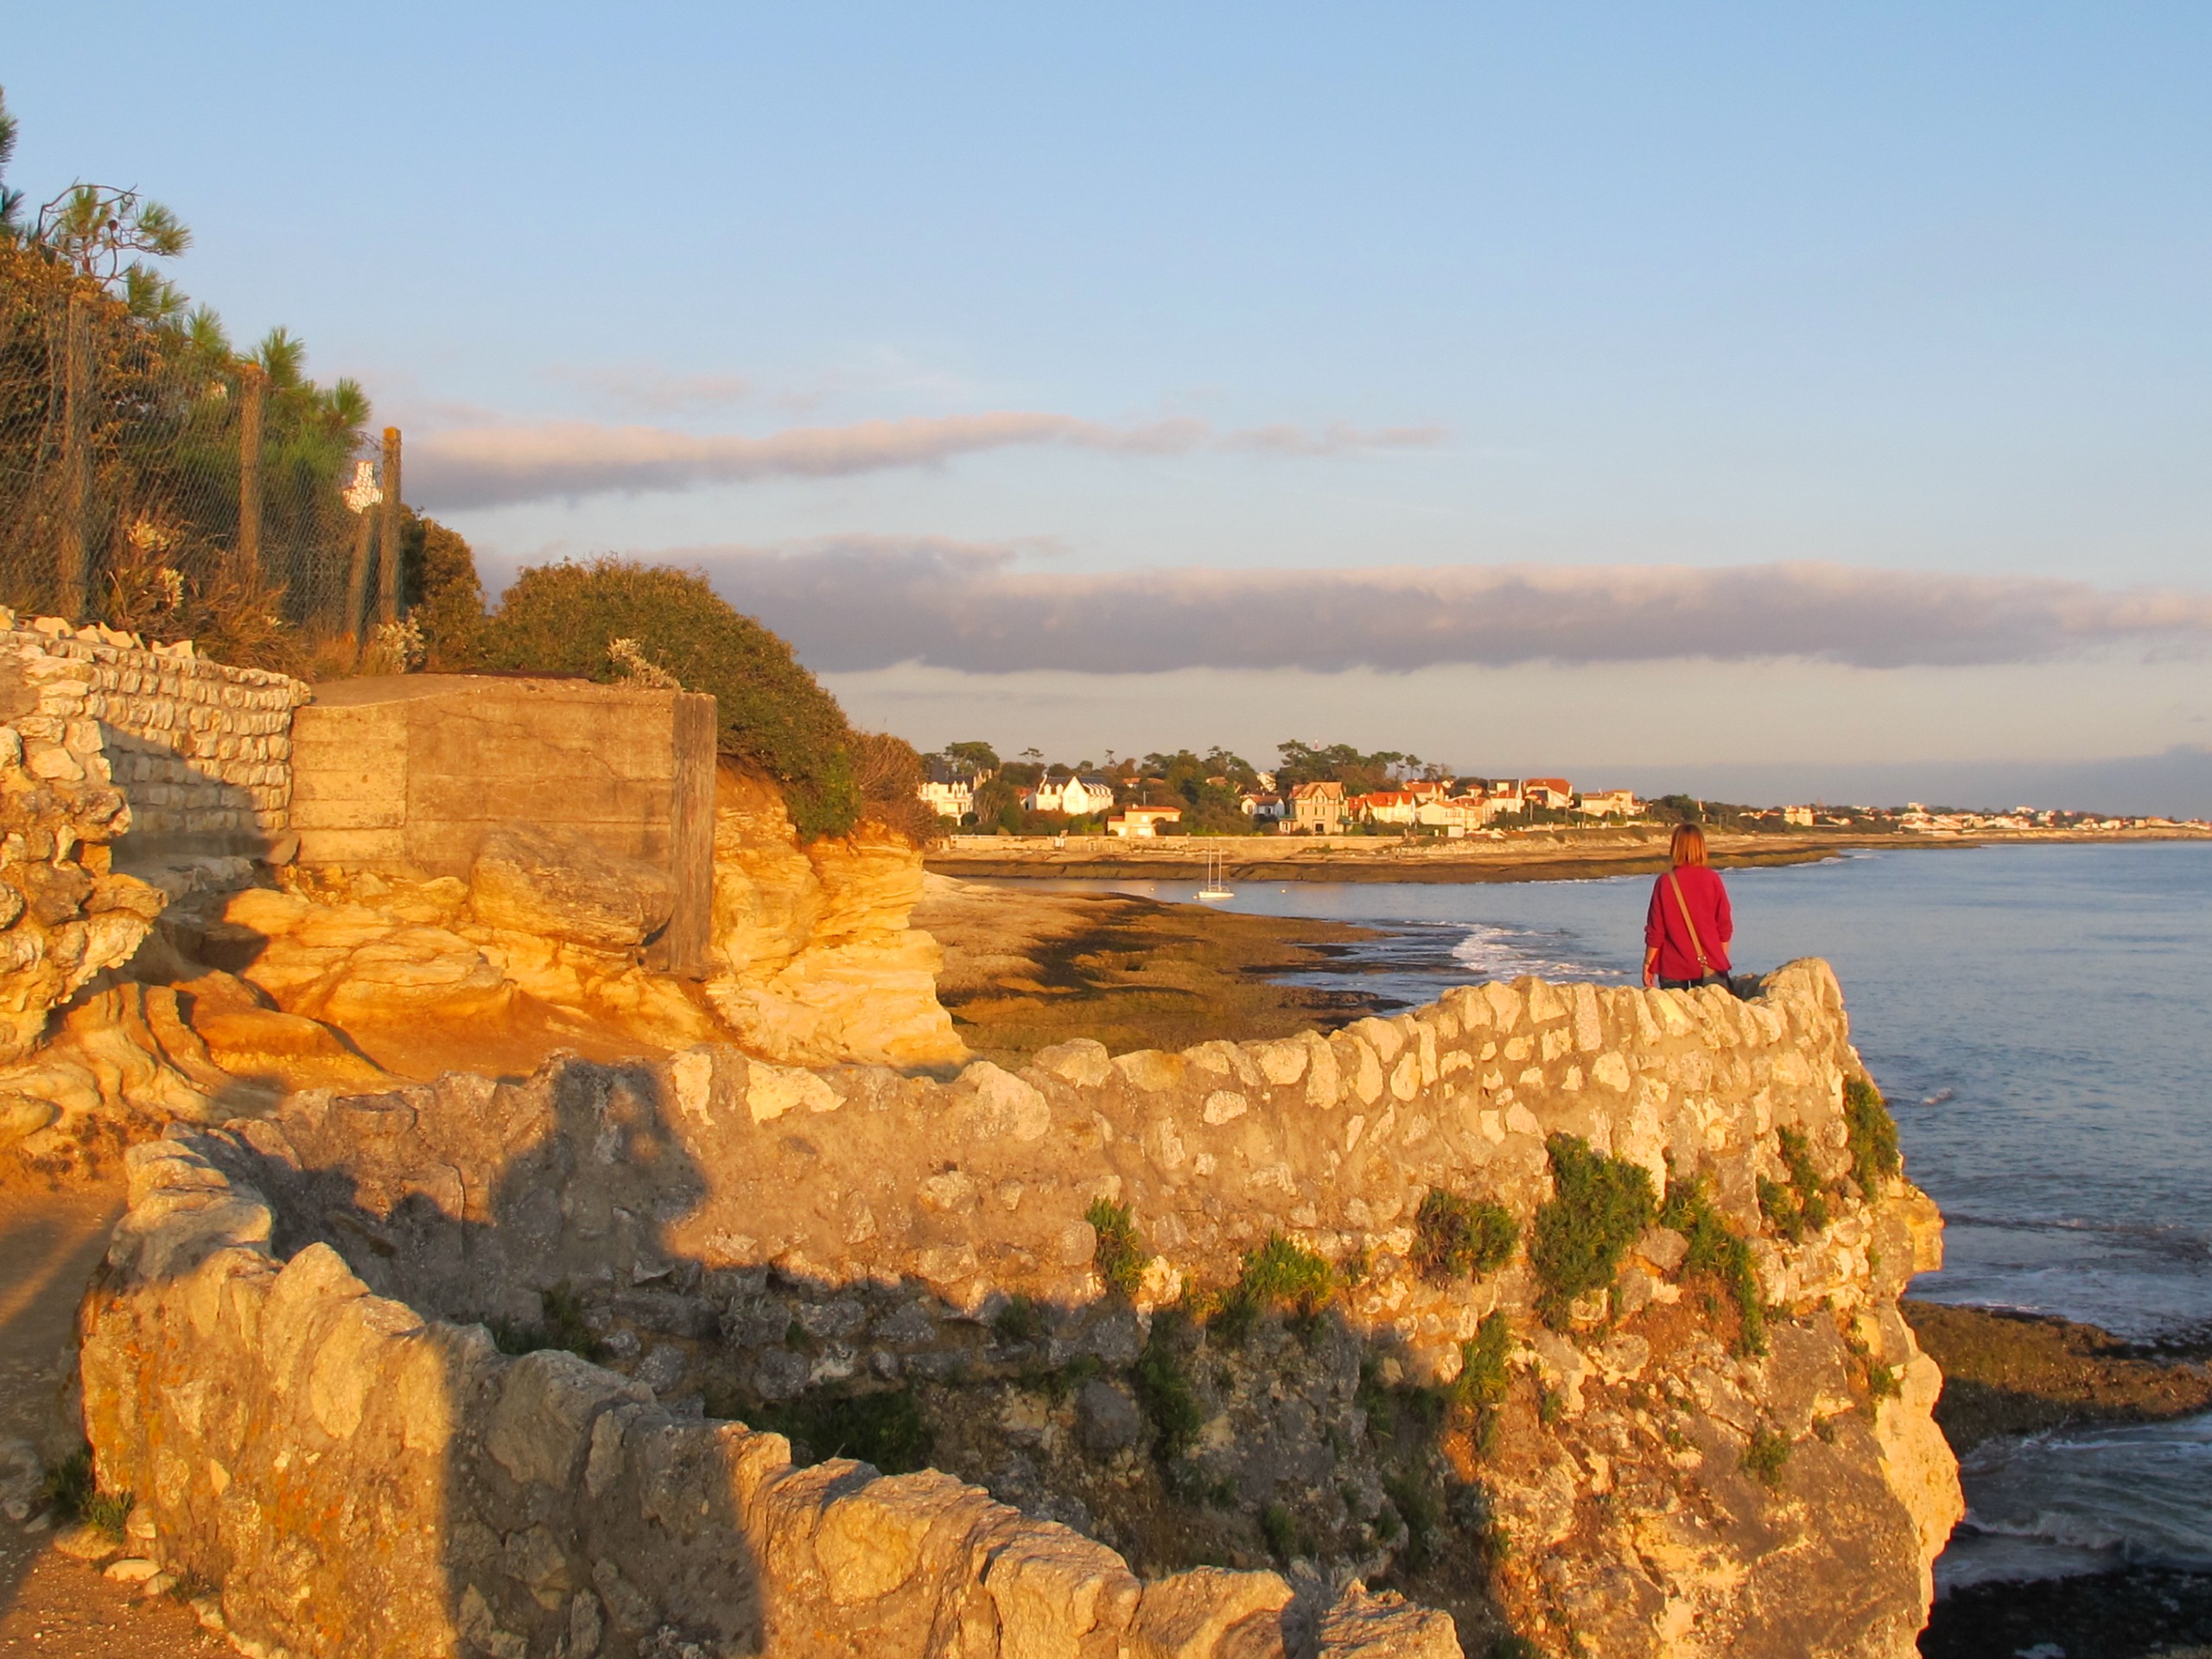 Atlantic Coast from La rochelle to Royan (self guided tour)-7-Day 7 • Sunset in Saint-Palais-sur-Mer © Jean-Claude Praire